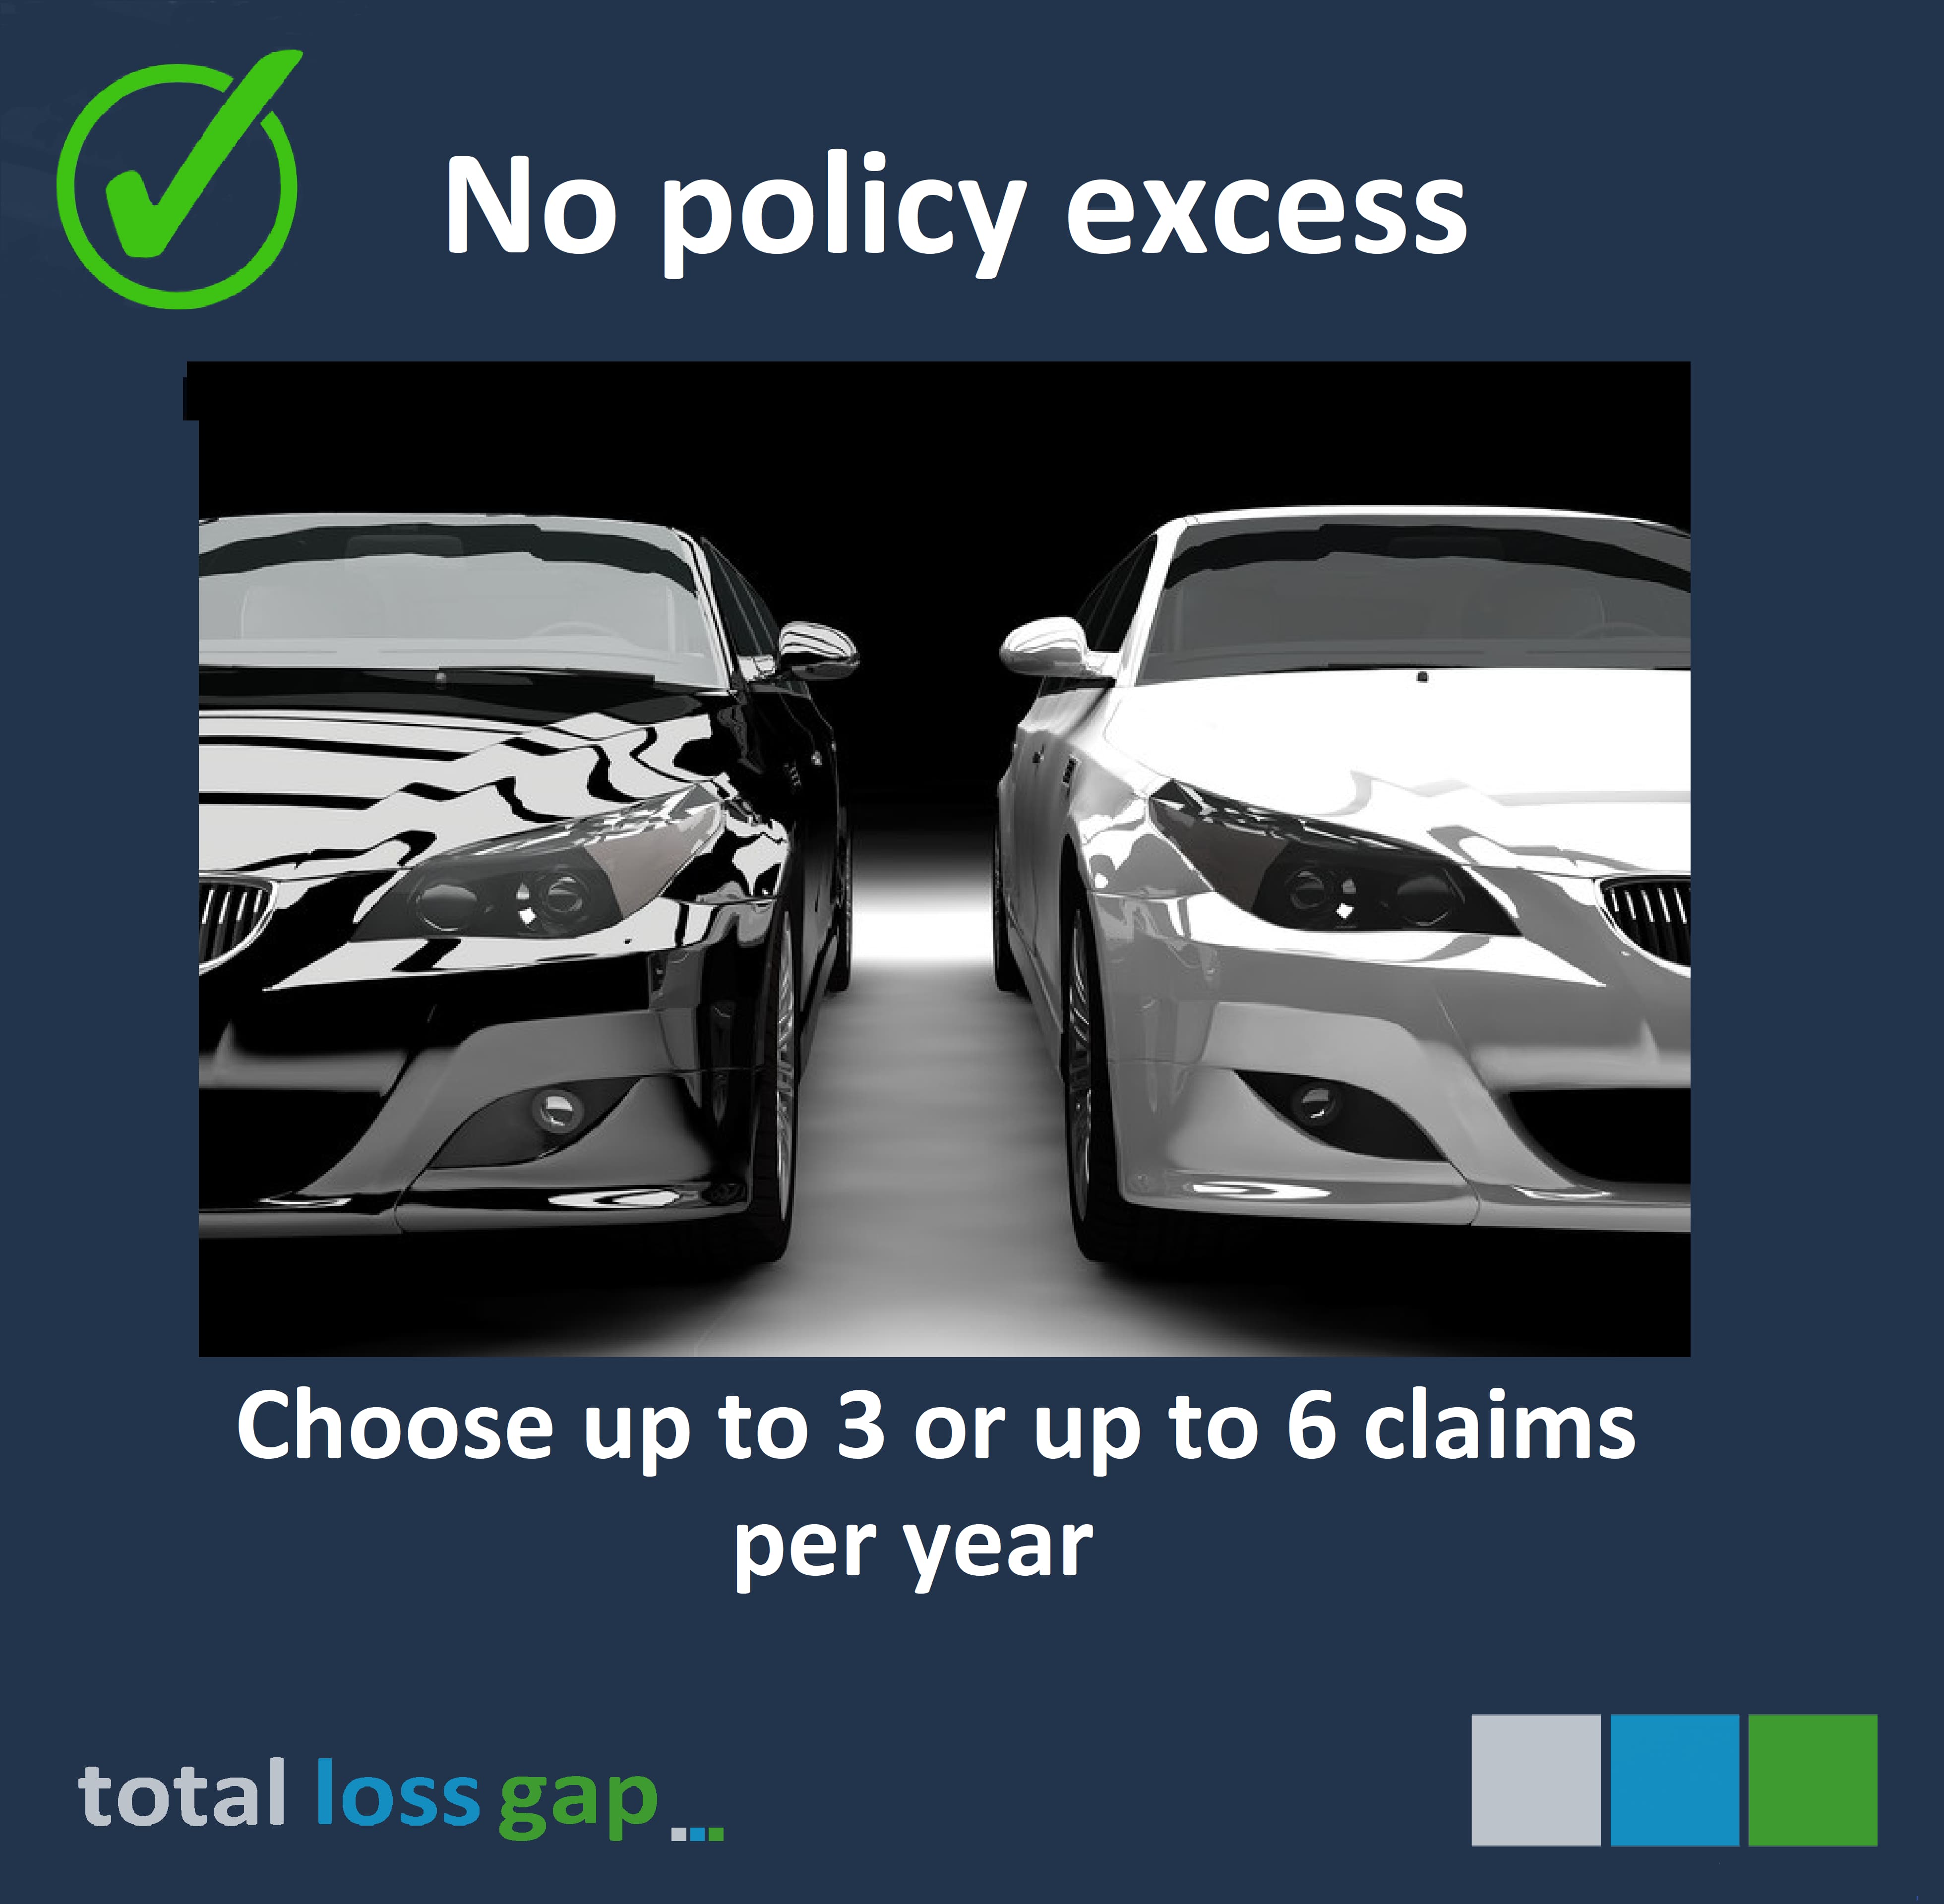 You can choose 3 or 6 scratch and dent claims per year.